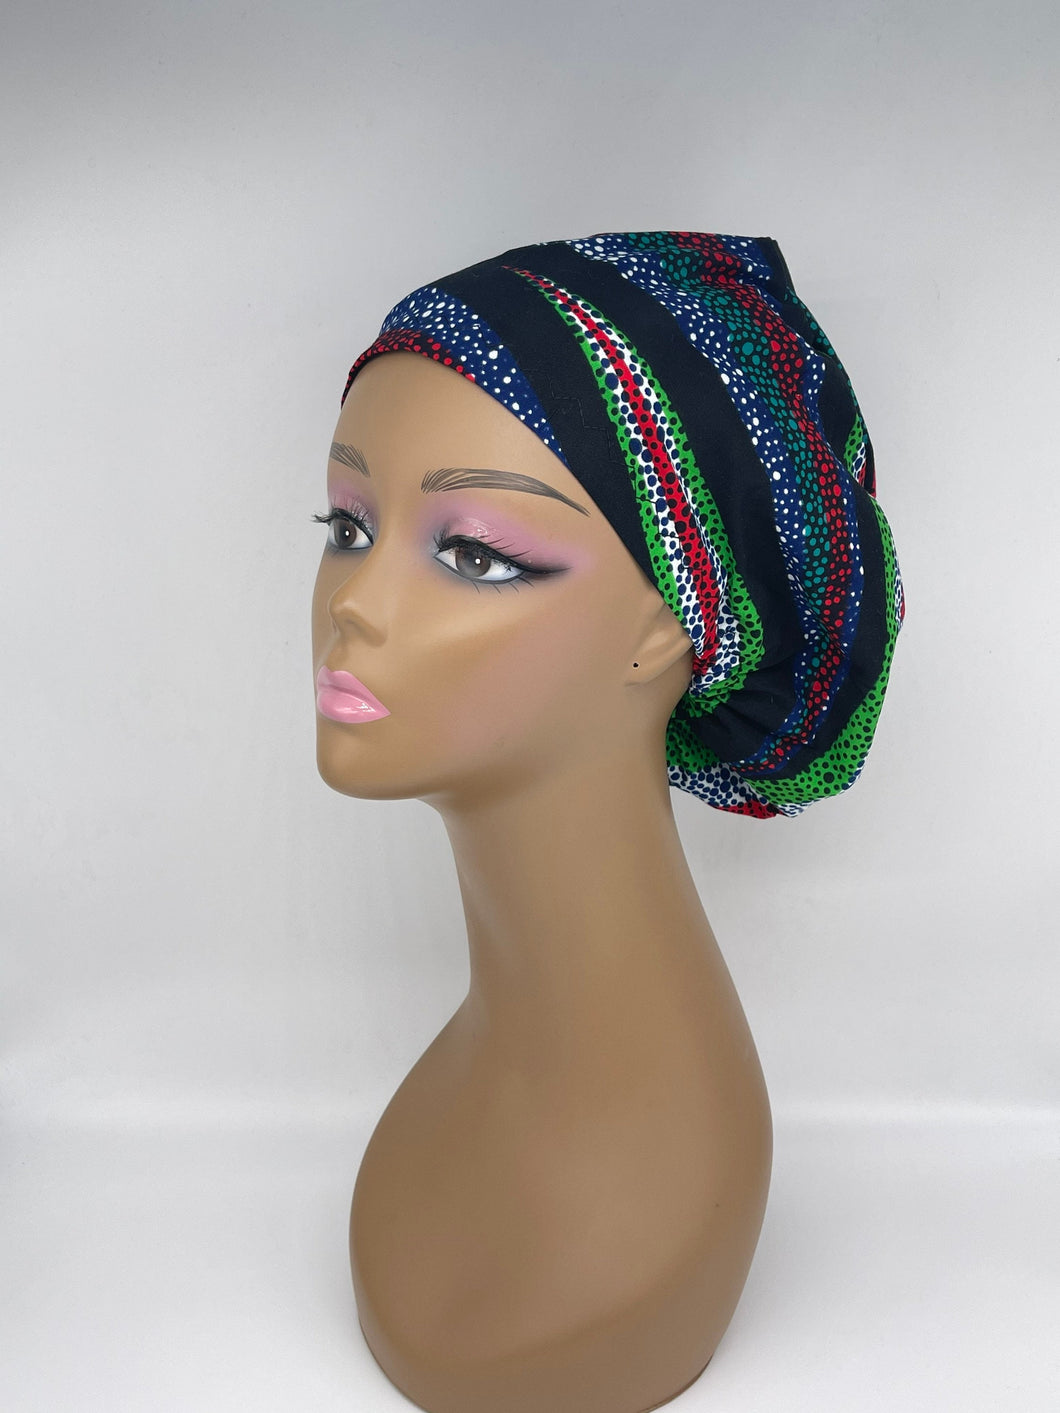 Niceroy surgical SCRUB HAT CAP,  Ankara Europe style nursing caps made with African print fabric and satin lining option Black green red